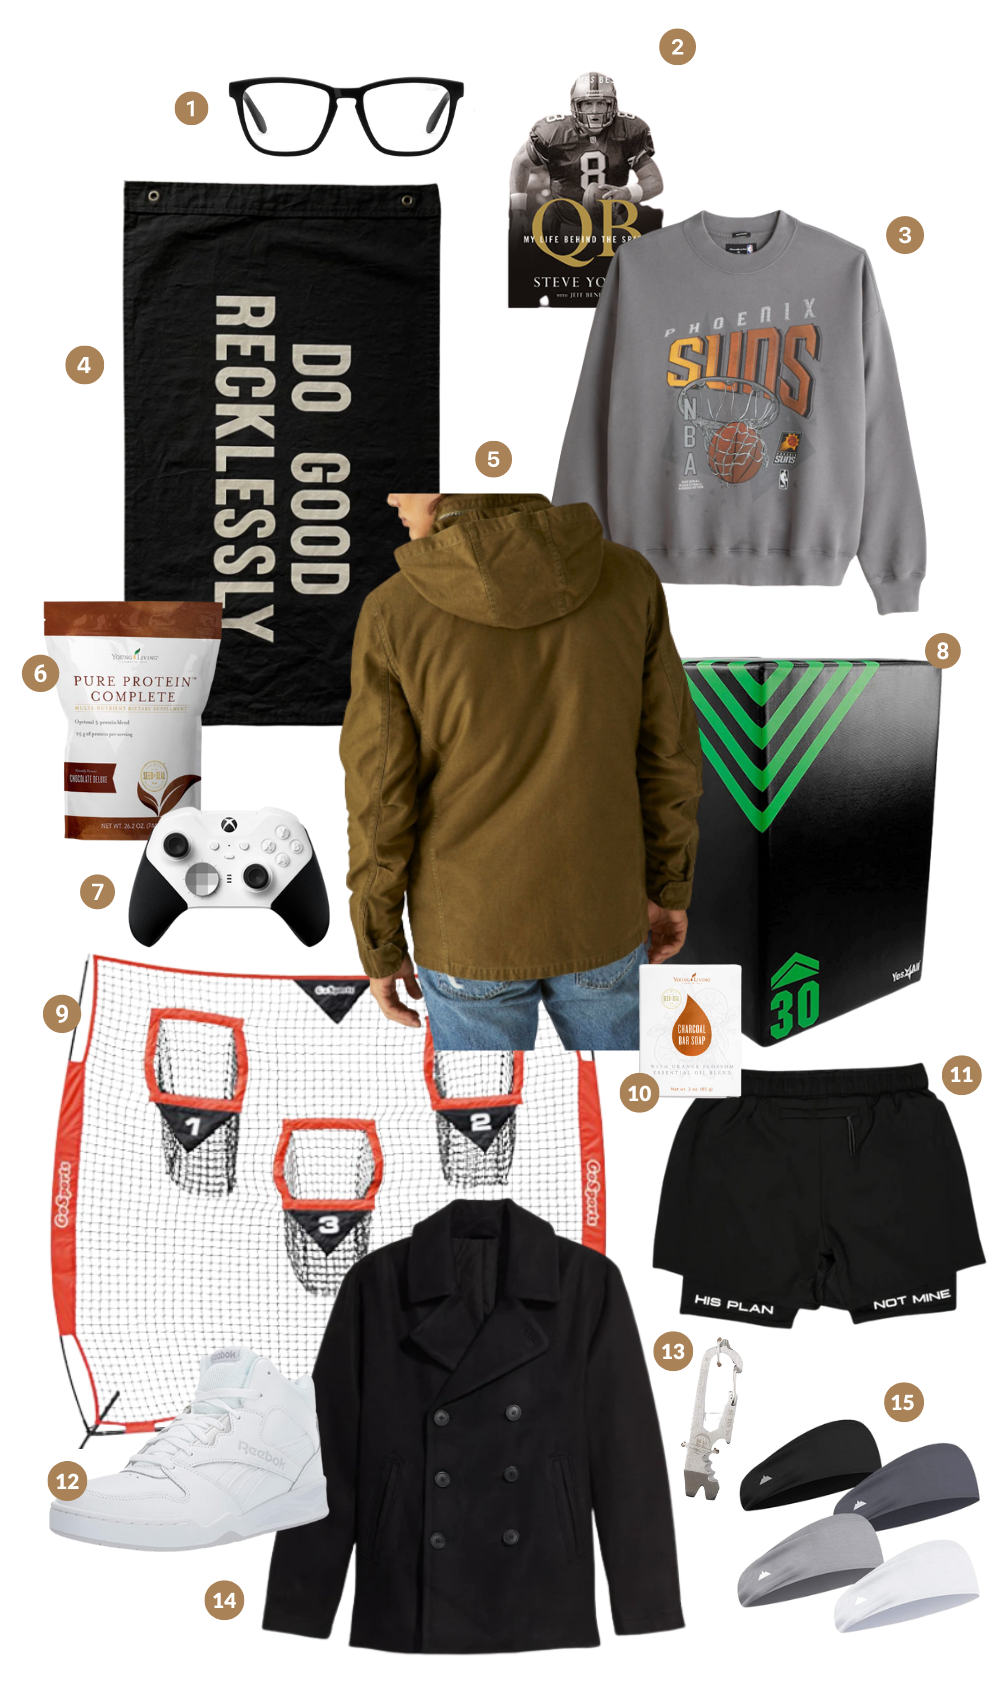 Holiday gift guide & stocking stuffer inspiration for the teen guys this holiday season! It's my 2022 gift guide for teens and I hope you find something you would love to gift this Christmas season! Be sure and catch the full Gift Guide Week over on KaraLayne.com!